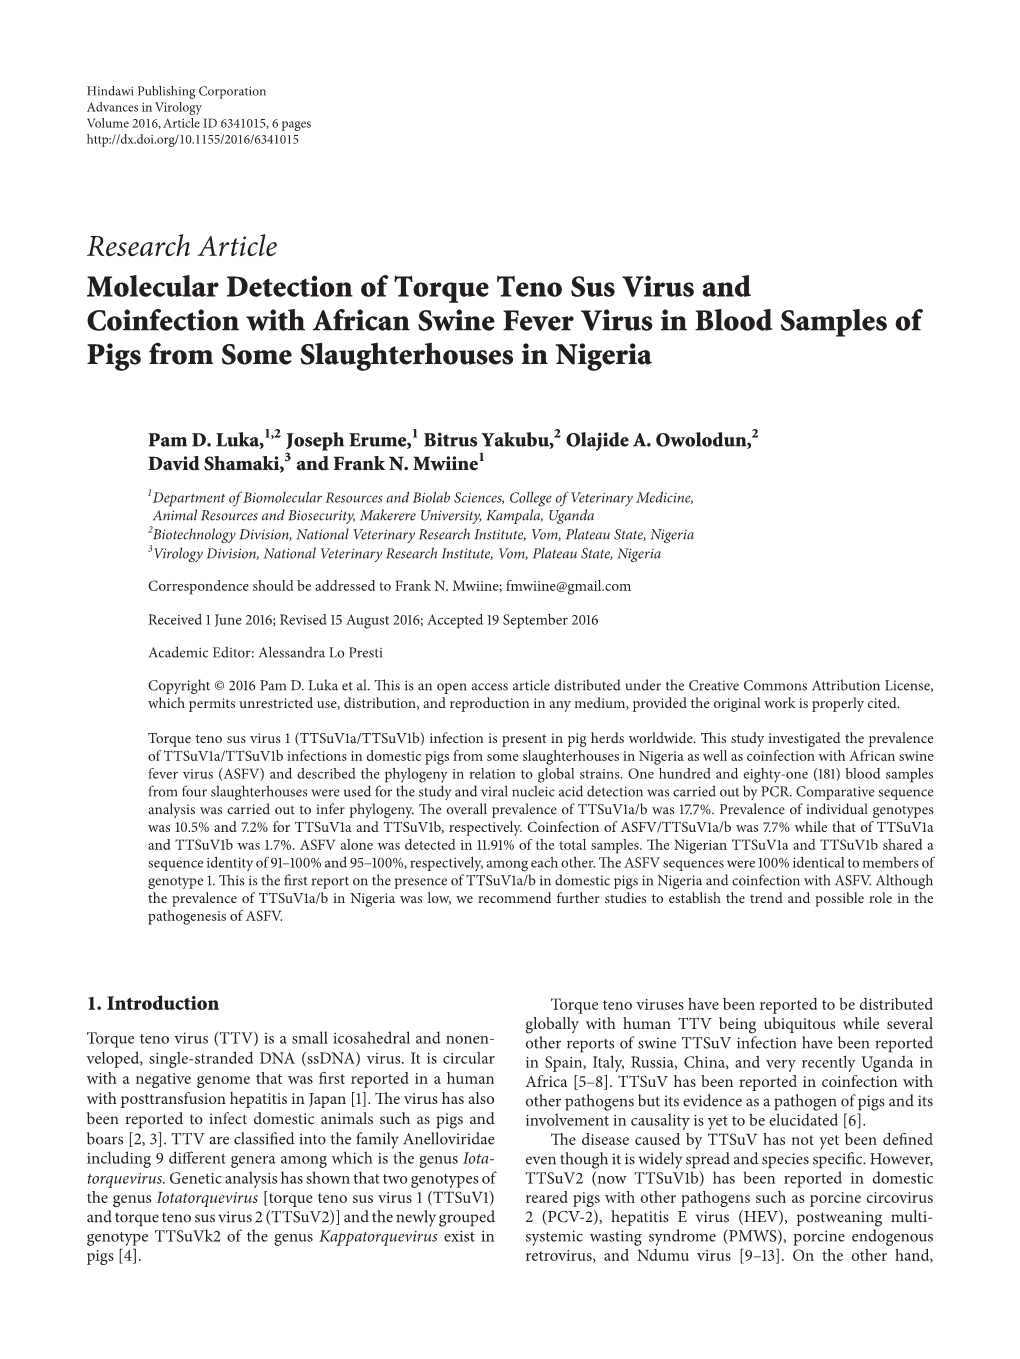 Research Article Molecular Detection of Torque Teno Sus Virus and Coinfection with African Swine Fever Virus in Blood Samples Of